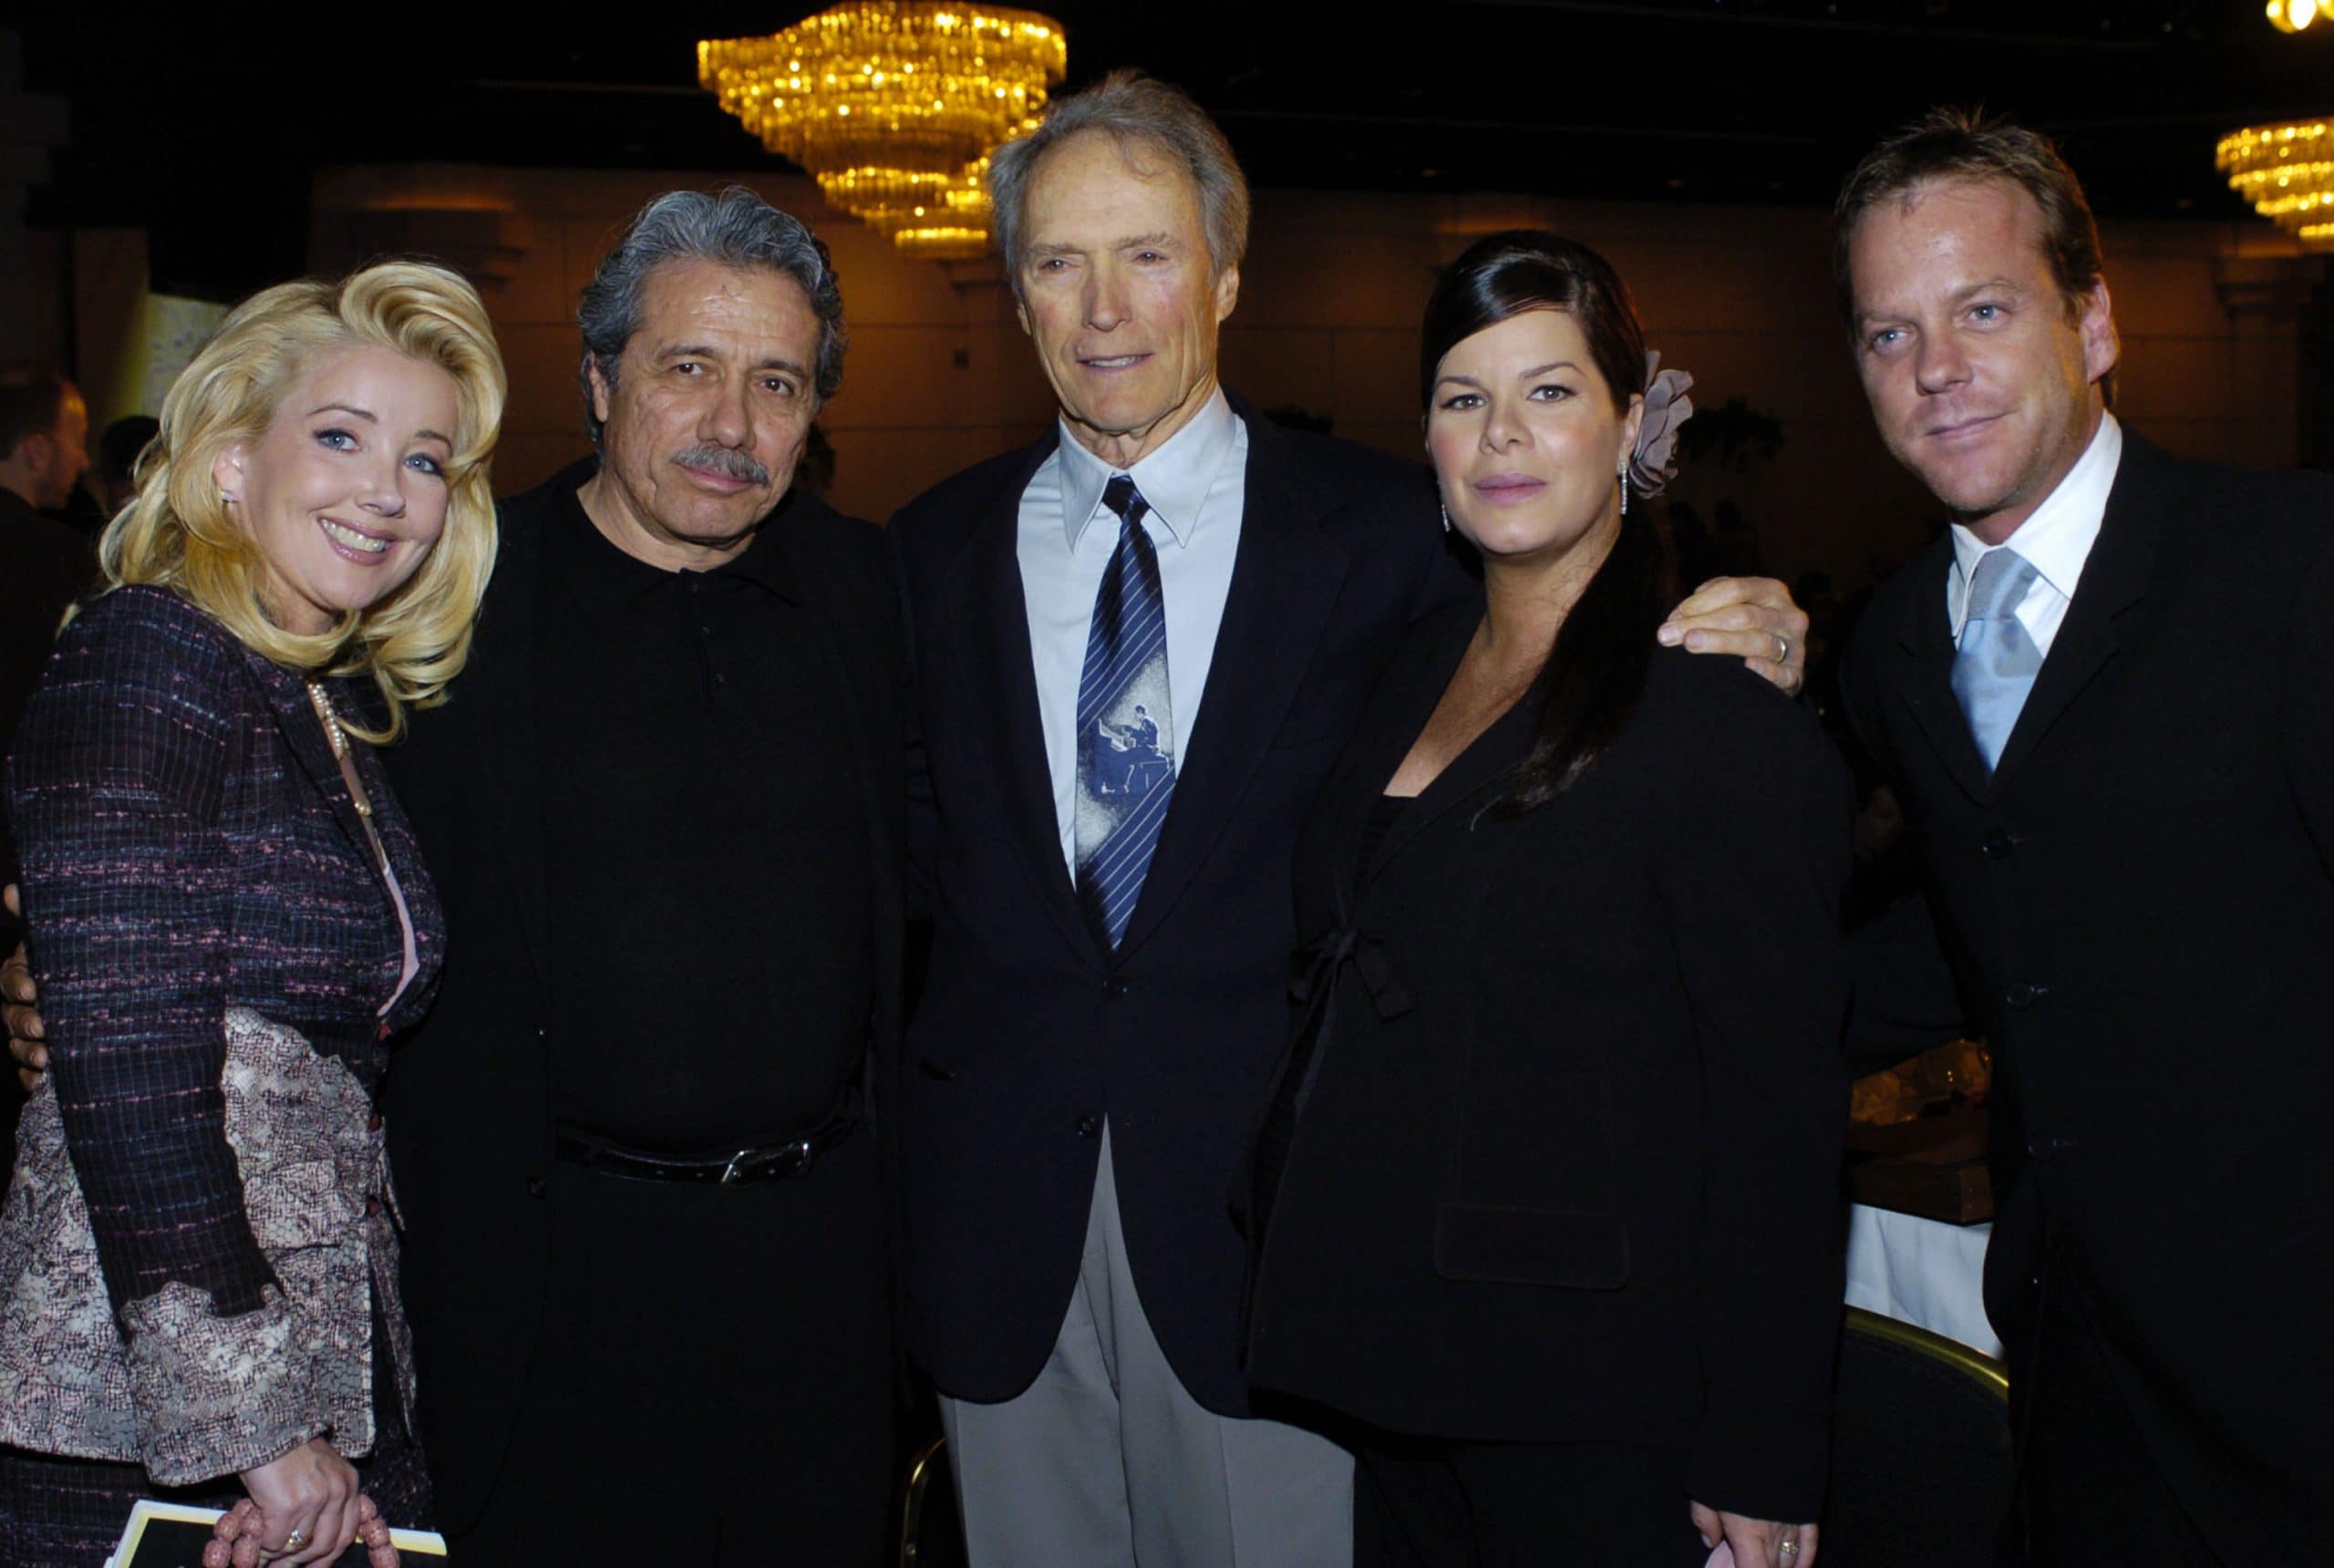 Melody Thomas Scott, Edward James Olmos, Clint Eastwood, Marcia Gay Harden, and Kiefer Sutherland 